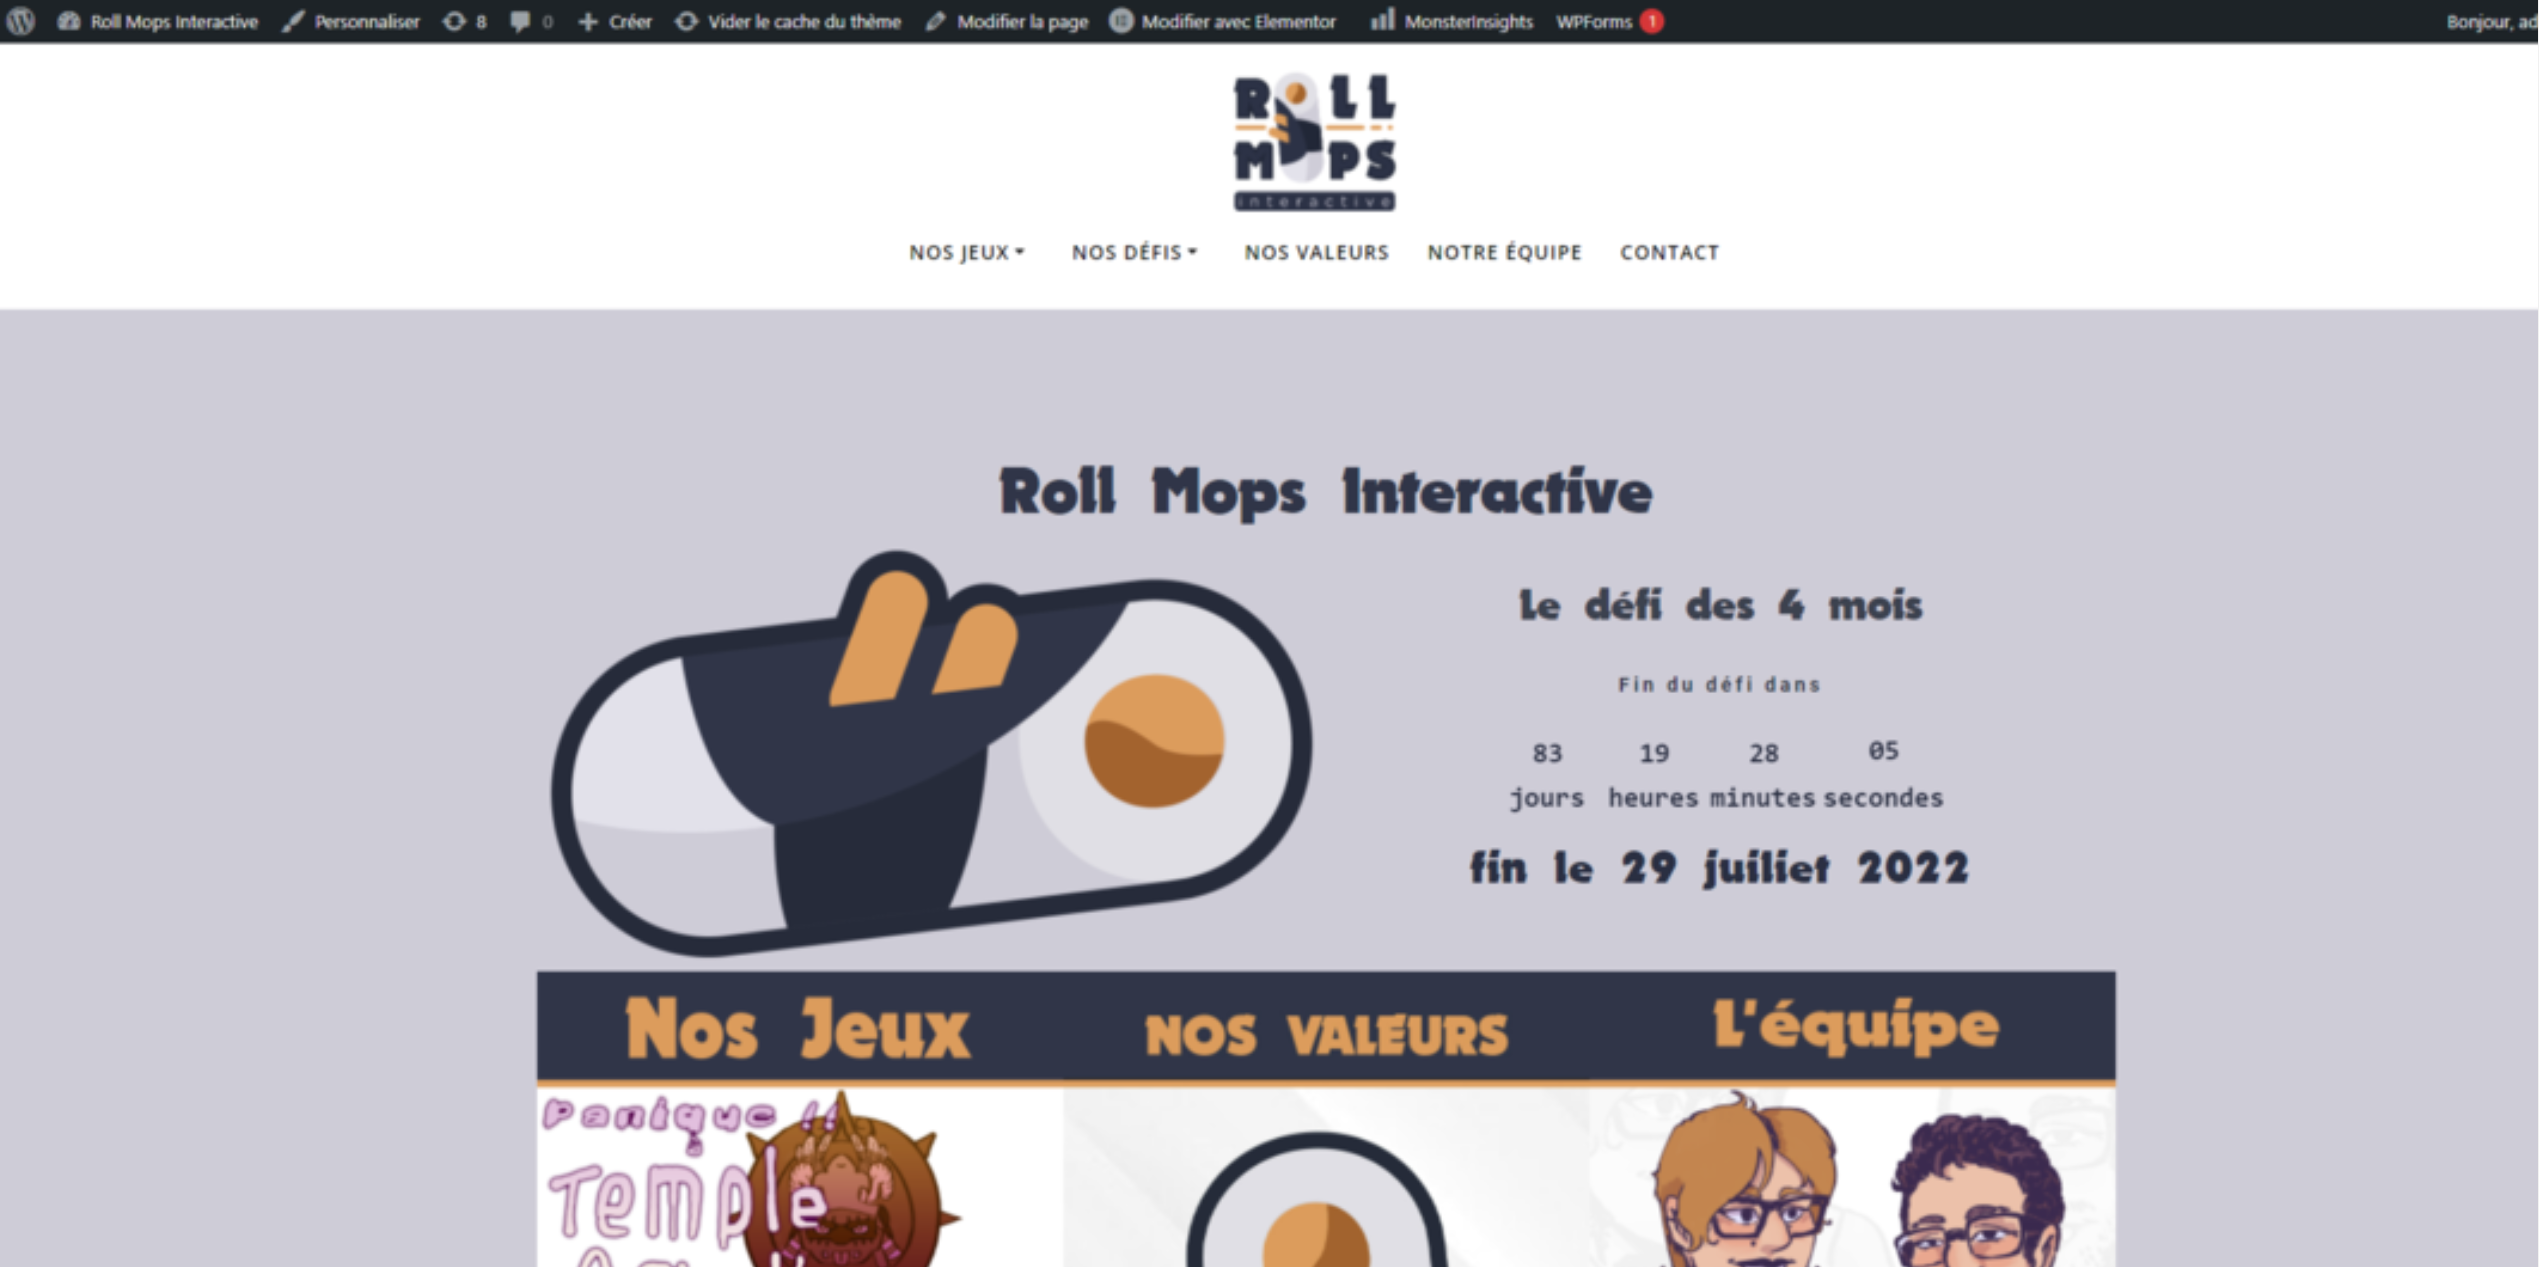 Roll Mops Interactive (Image not created for moment)